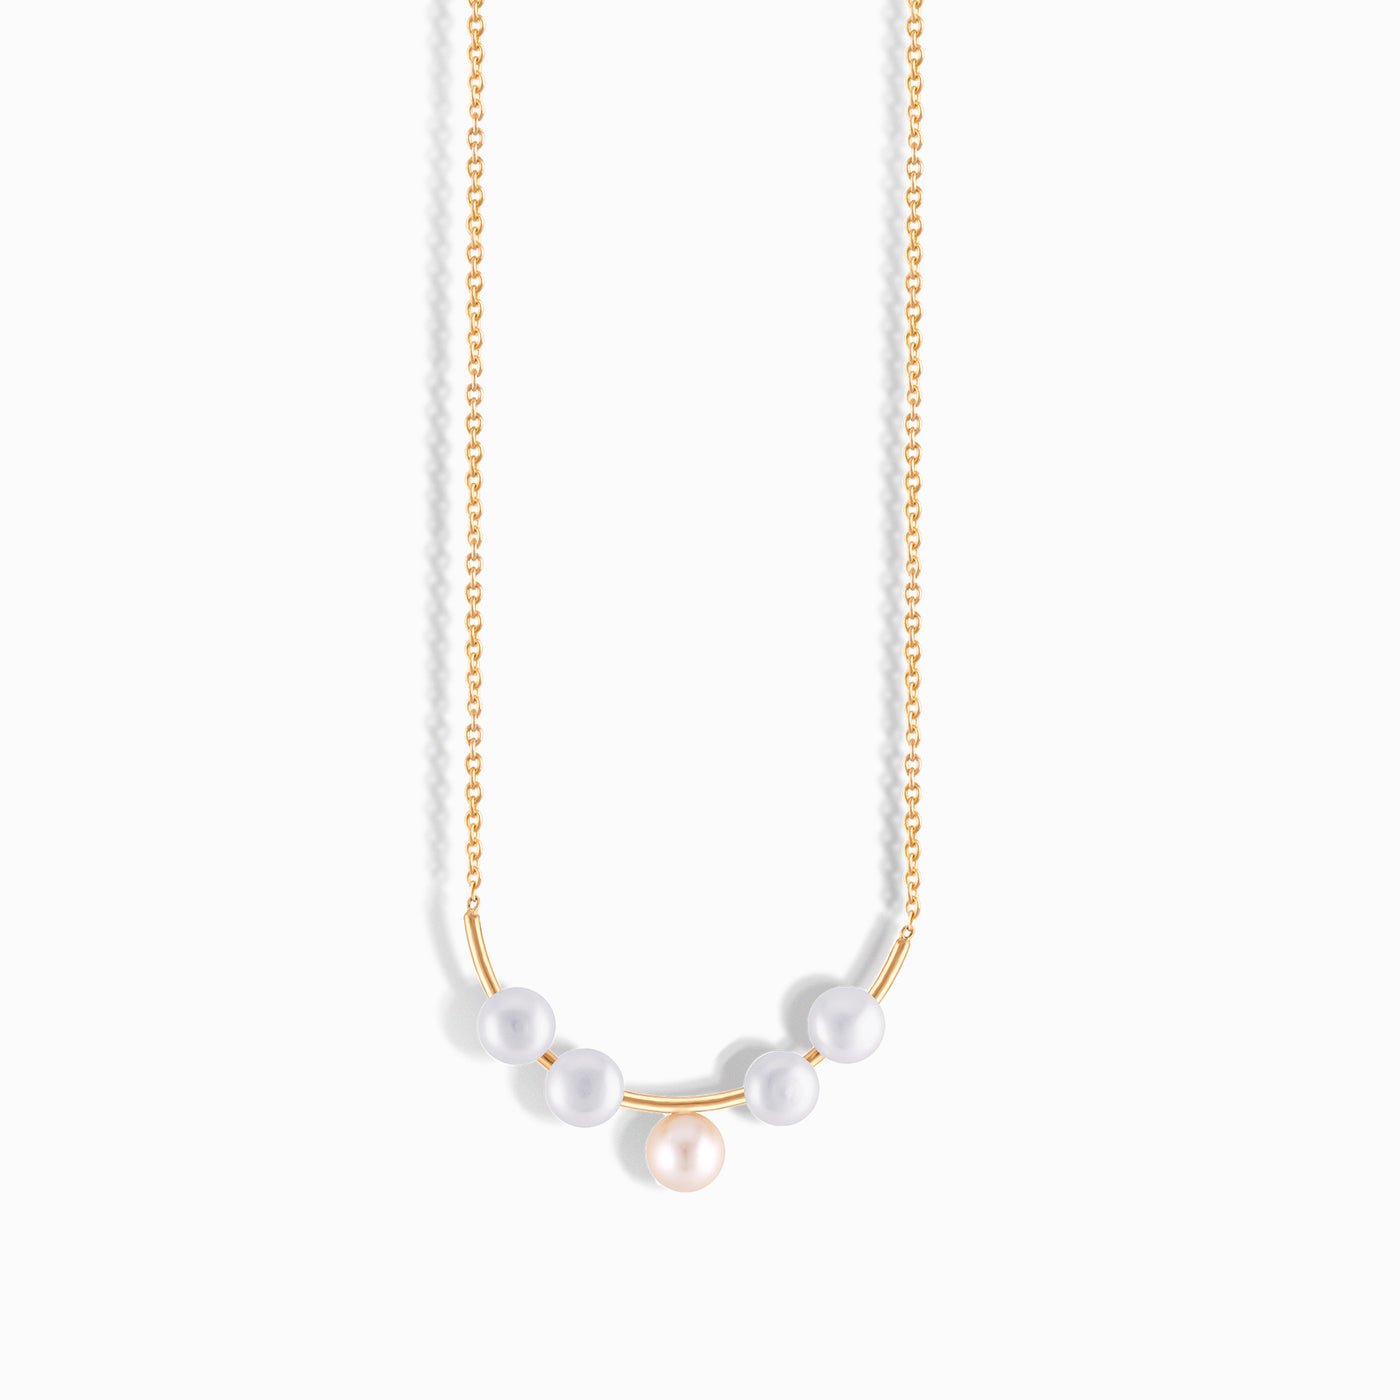 Line and Pearl Necklace